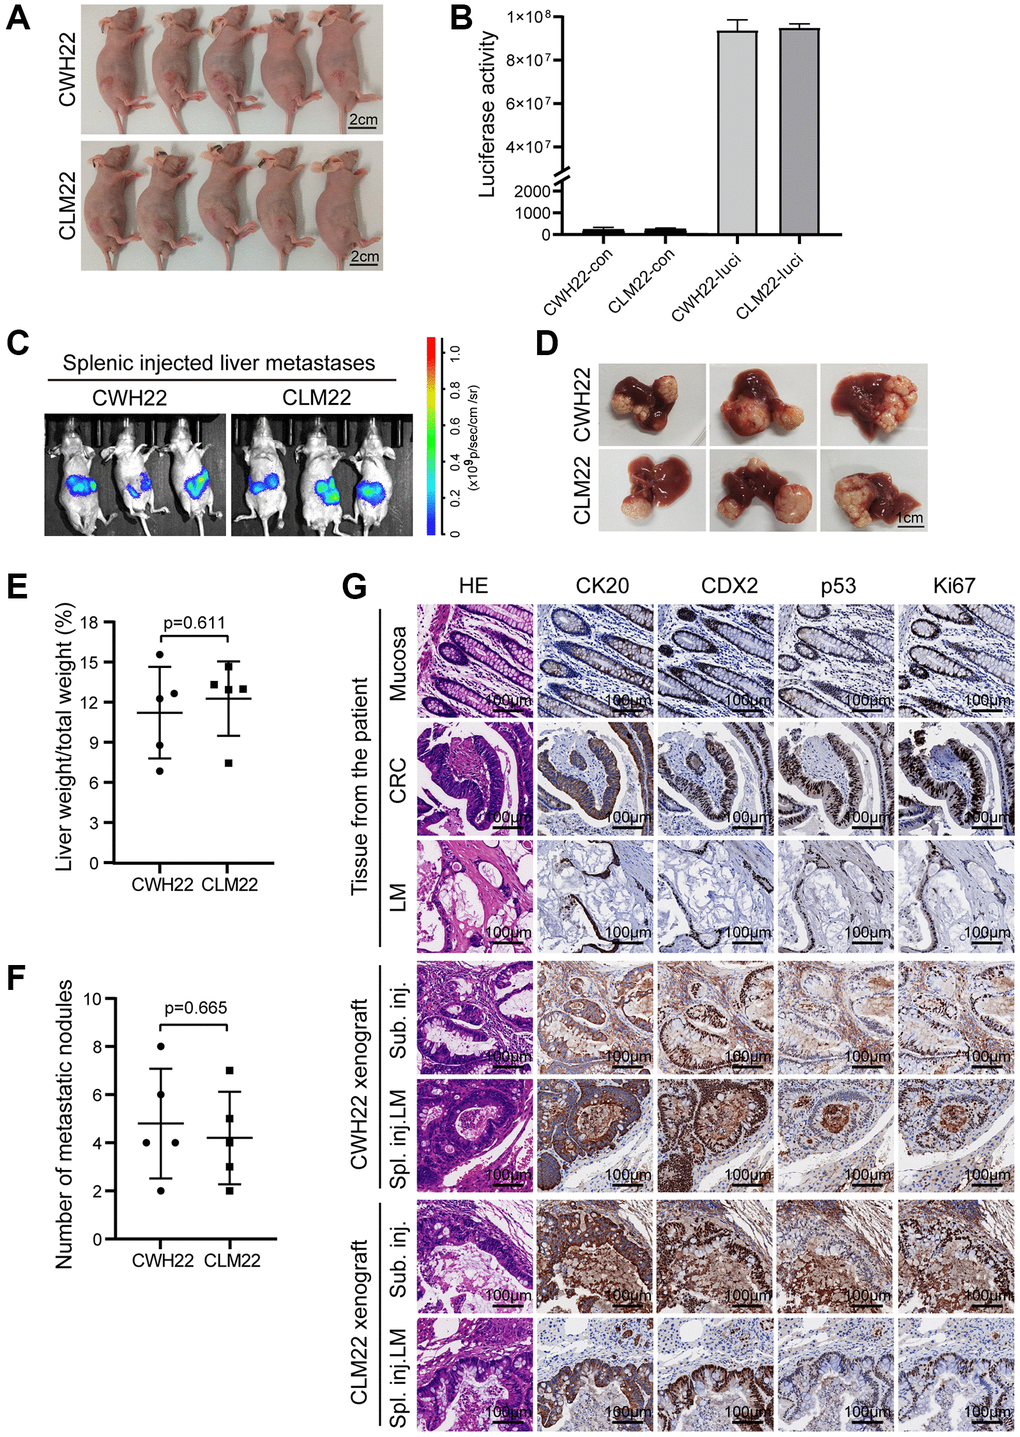 Tumorigenicity of CWH22 and CLM22 organoids in vivo. (A) Images of nude mice bearing CWH22 and CLM22 subcutaneous xenografts (scale bars, 2 cm). (B) Luciferase activity tests of CWH22-luci and CLM22-luci (CWH22 and CLM22 with no luciferase expression were tested as control). (C) Representative bioluminescence images of mice with liver metastases 42 days after splenic injection. (D) Representative pictures of livers with metastatic lesions (on day 45) harvested from mice receiving splenic injections of CWH22 and CLM22 organoid cells (scale bars, 1 cm). (E) Quantitative analysis of the percentage of tumor-bearing liver weight to body weight following splenic injection (n = 5; data represented as the mean ± SD). (F) Quantitative analysis of the metastatic nodule numbers per mouse following splenic injection (n = 5; data represented as the mean ± SD). (G) H&E morphology and IHC stains of tumor tissues from nude mice in A and B, as well as the normal mucosa and tumor tissues of the patient. Representative images of the expression of CK20, CDX2, Ki67, and p53 are shown (scale bars, 100 μm).